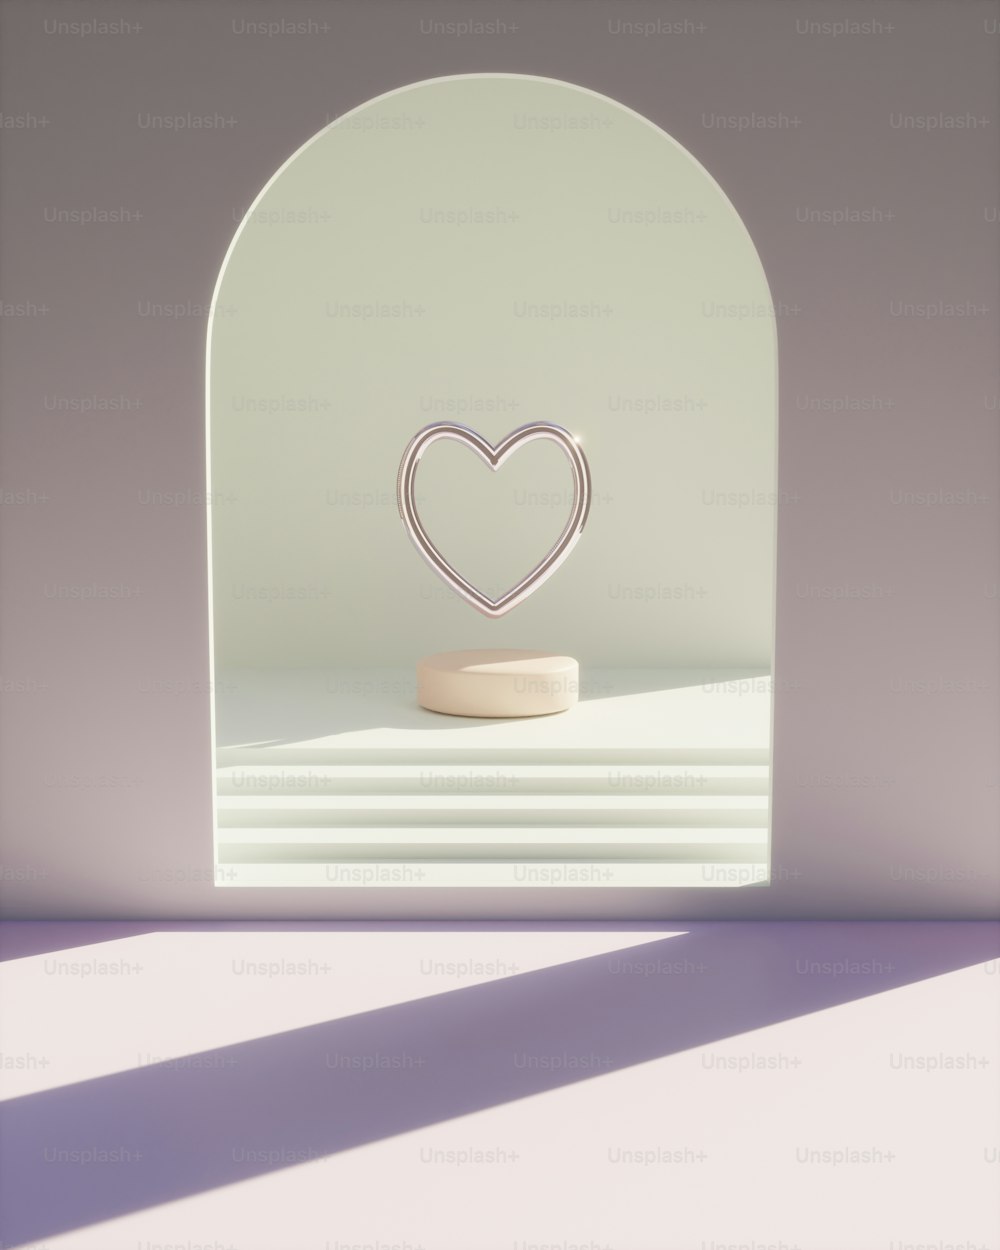 a heart shaped object sitting on top of a table